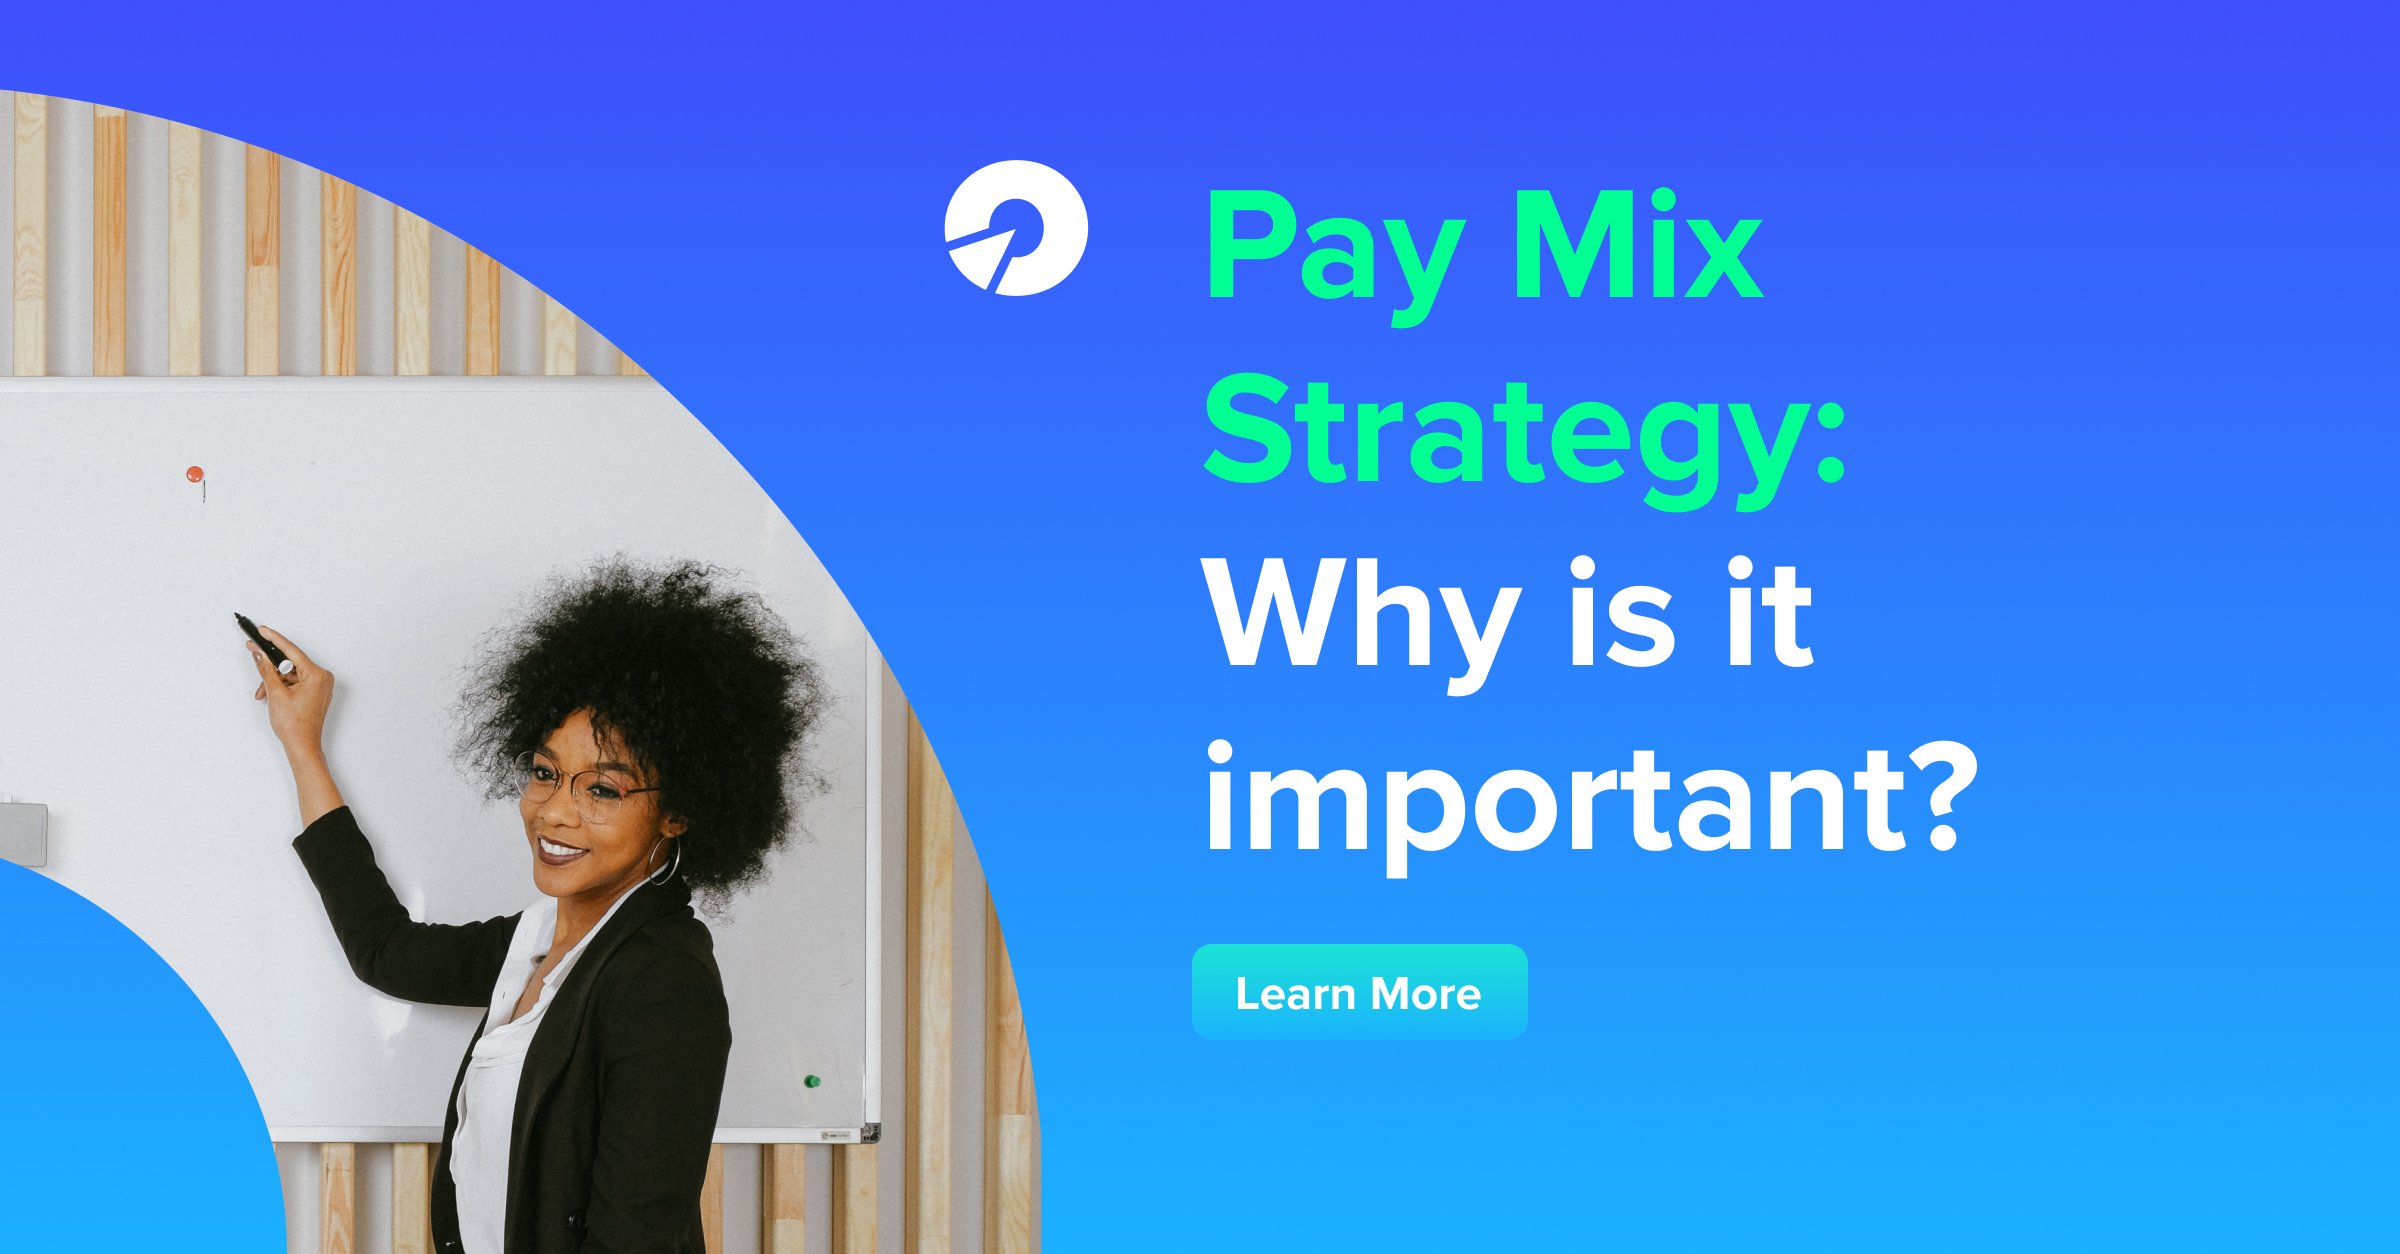 Pay Mix Strategy Why is it important?